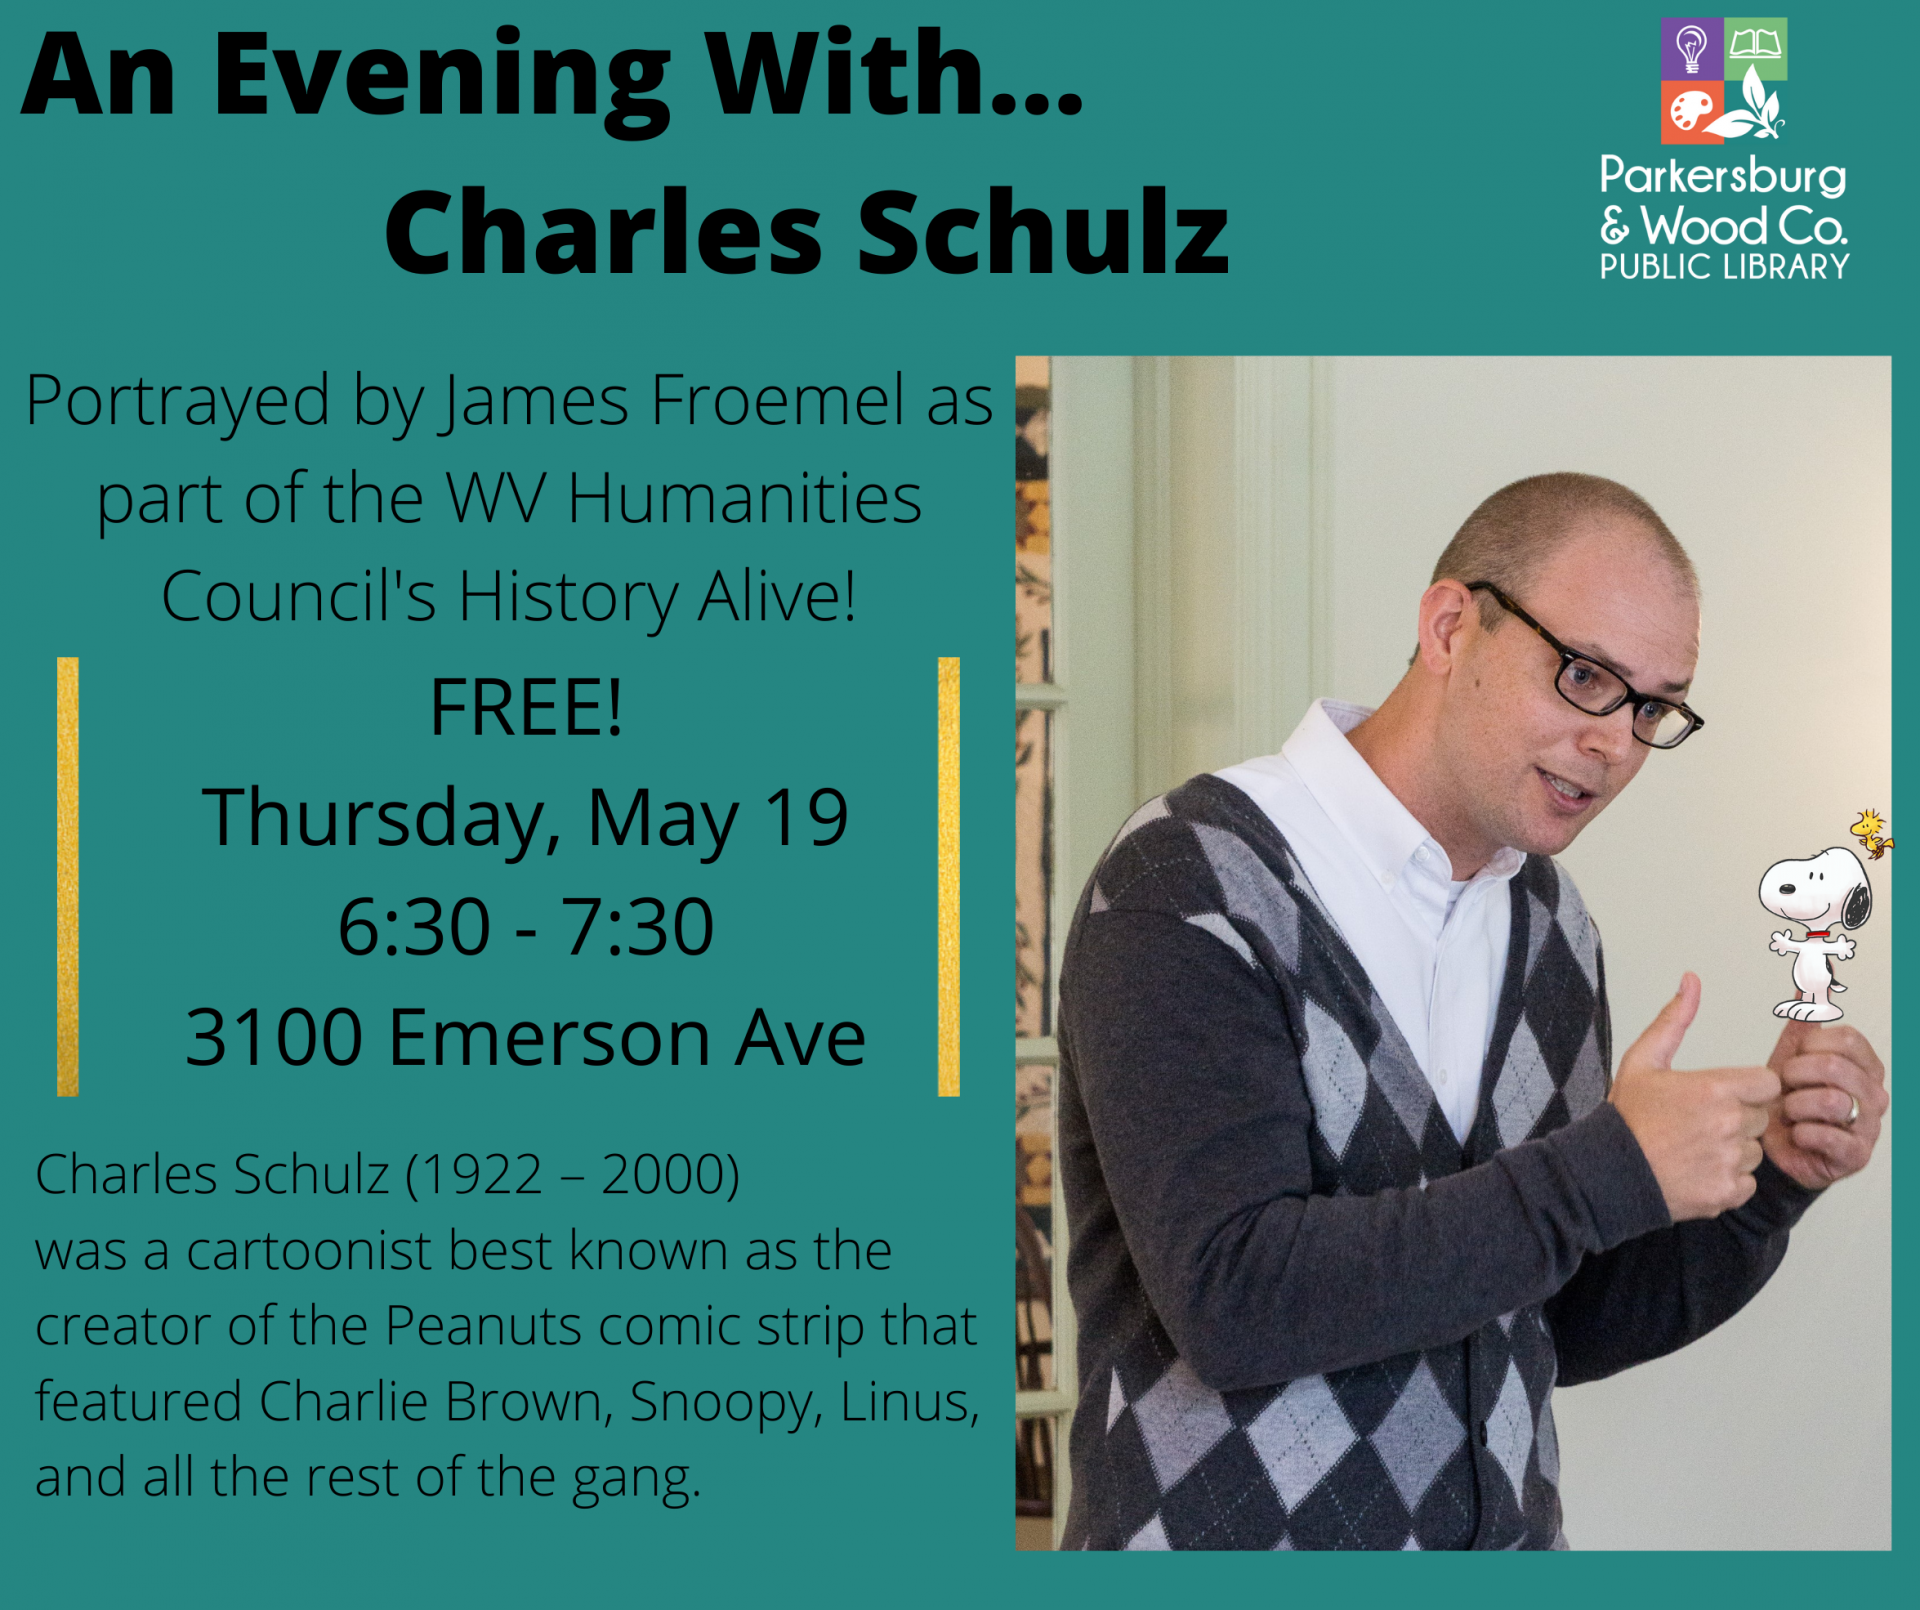 An Evening With: Charles Schulz at Emerson